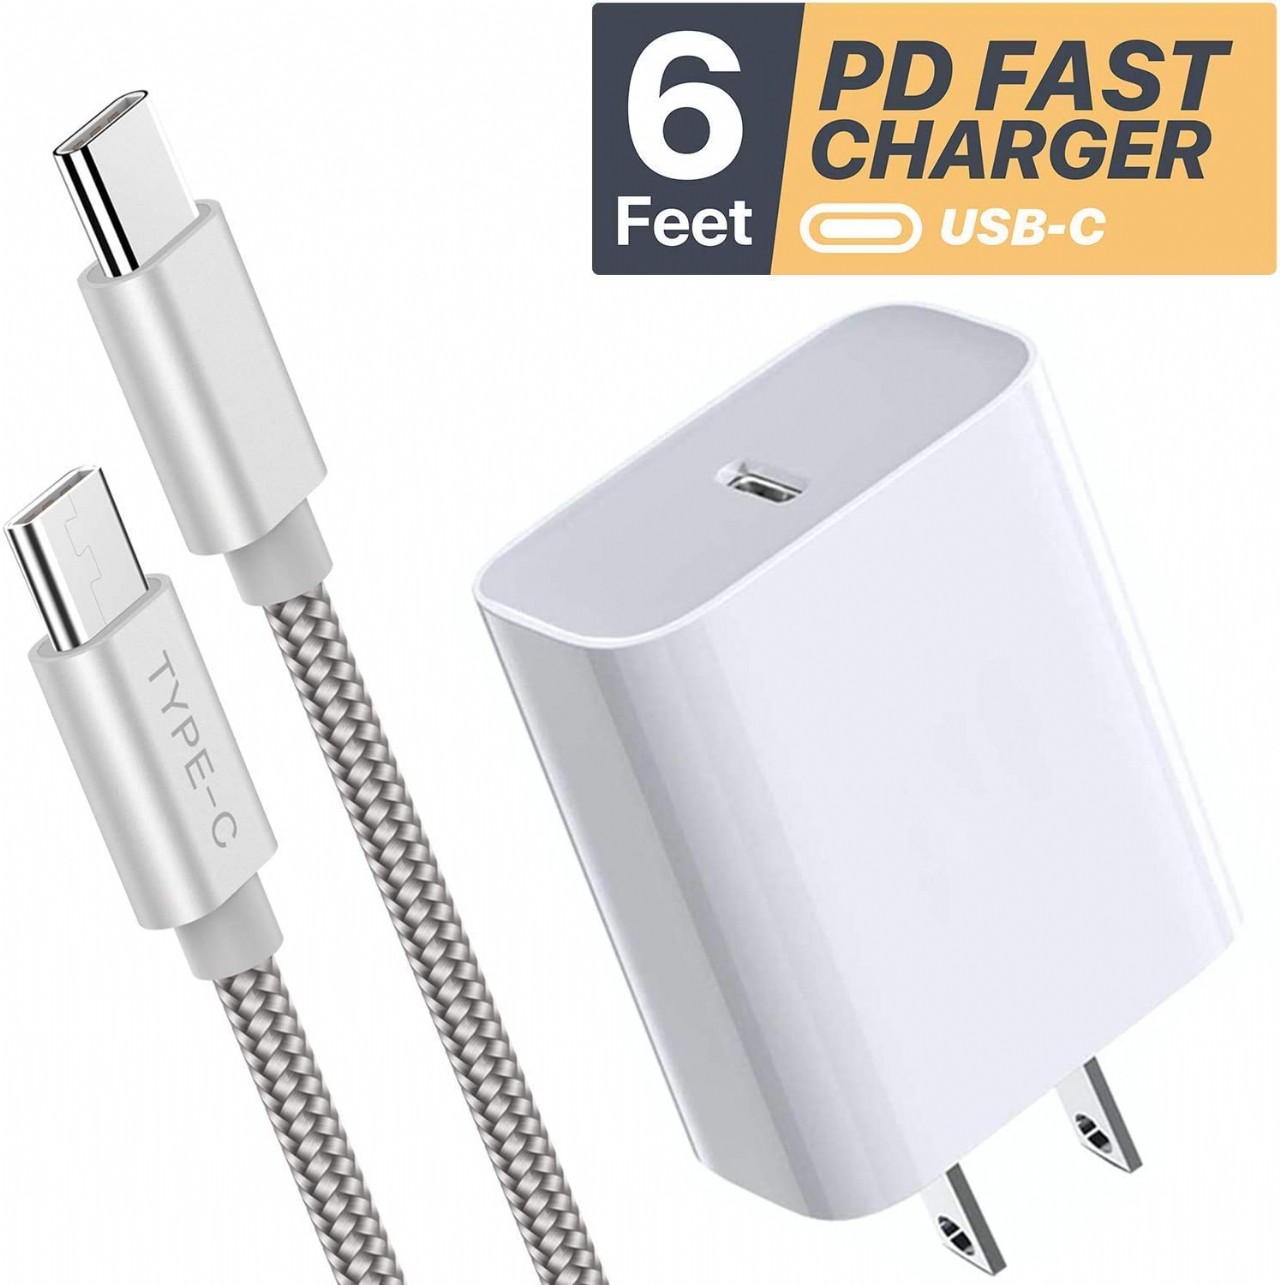 USB-C Fast Power Adapter for Latest iPad Pro (3rd Generation 11-inch and 12.9-Inch) 18W PD Quick